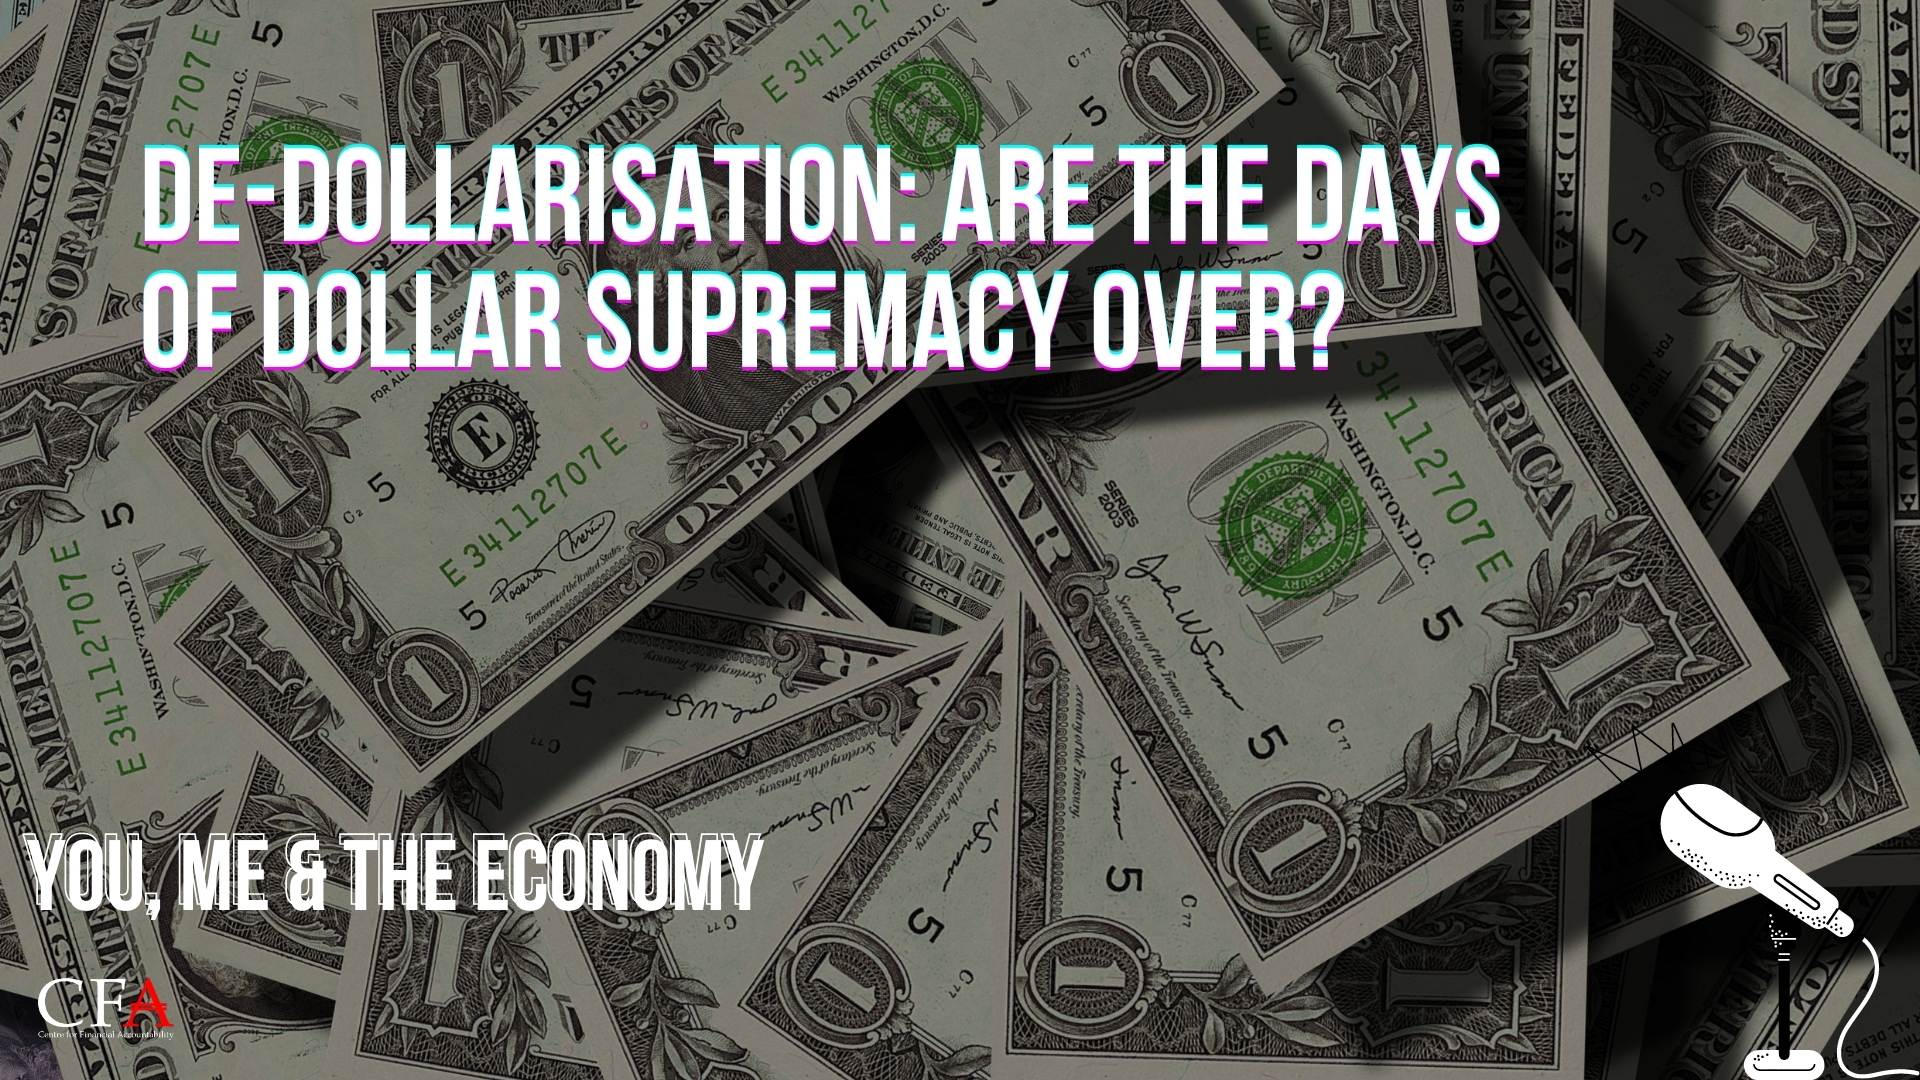 De-dollarisation: Are the days of dollar supremacy over?